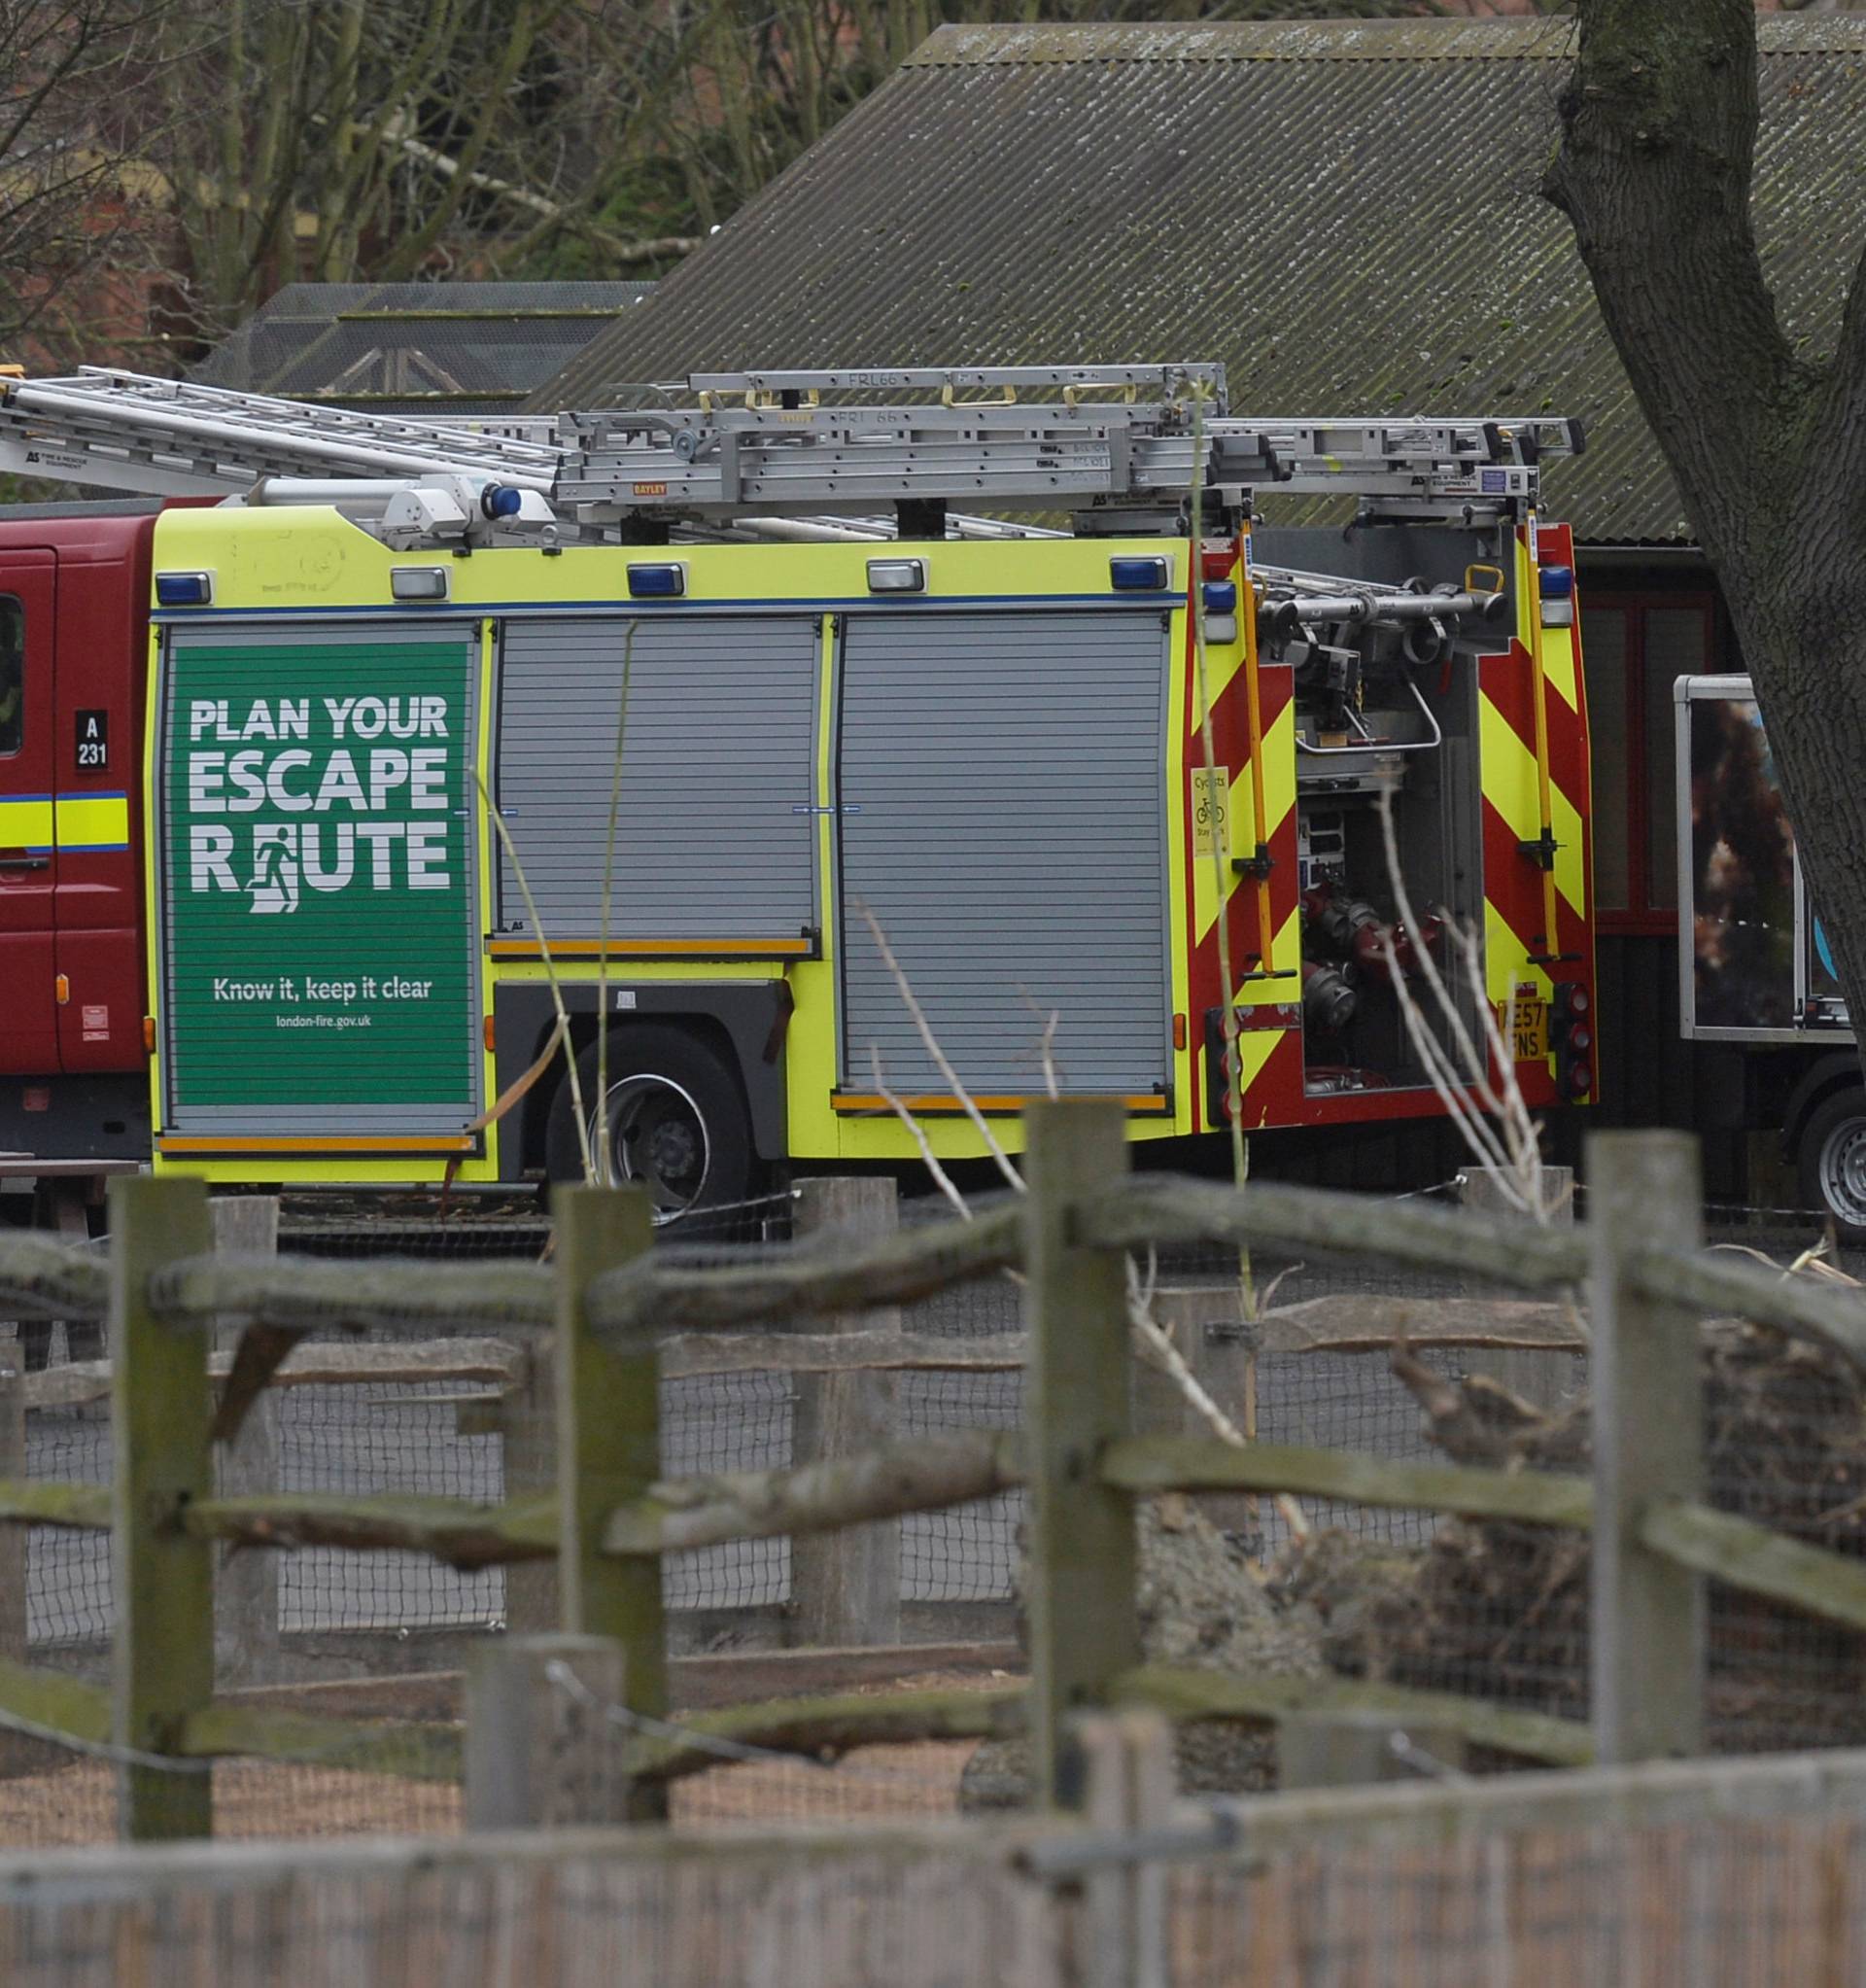 A fire engine is parked near an animal enclosure at London Zoo following a fire which broke out at a shop and cafe at the attraction, in central London